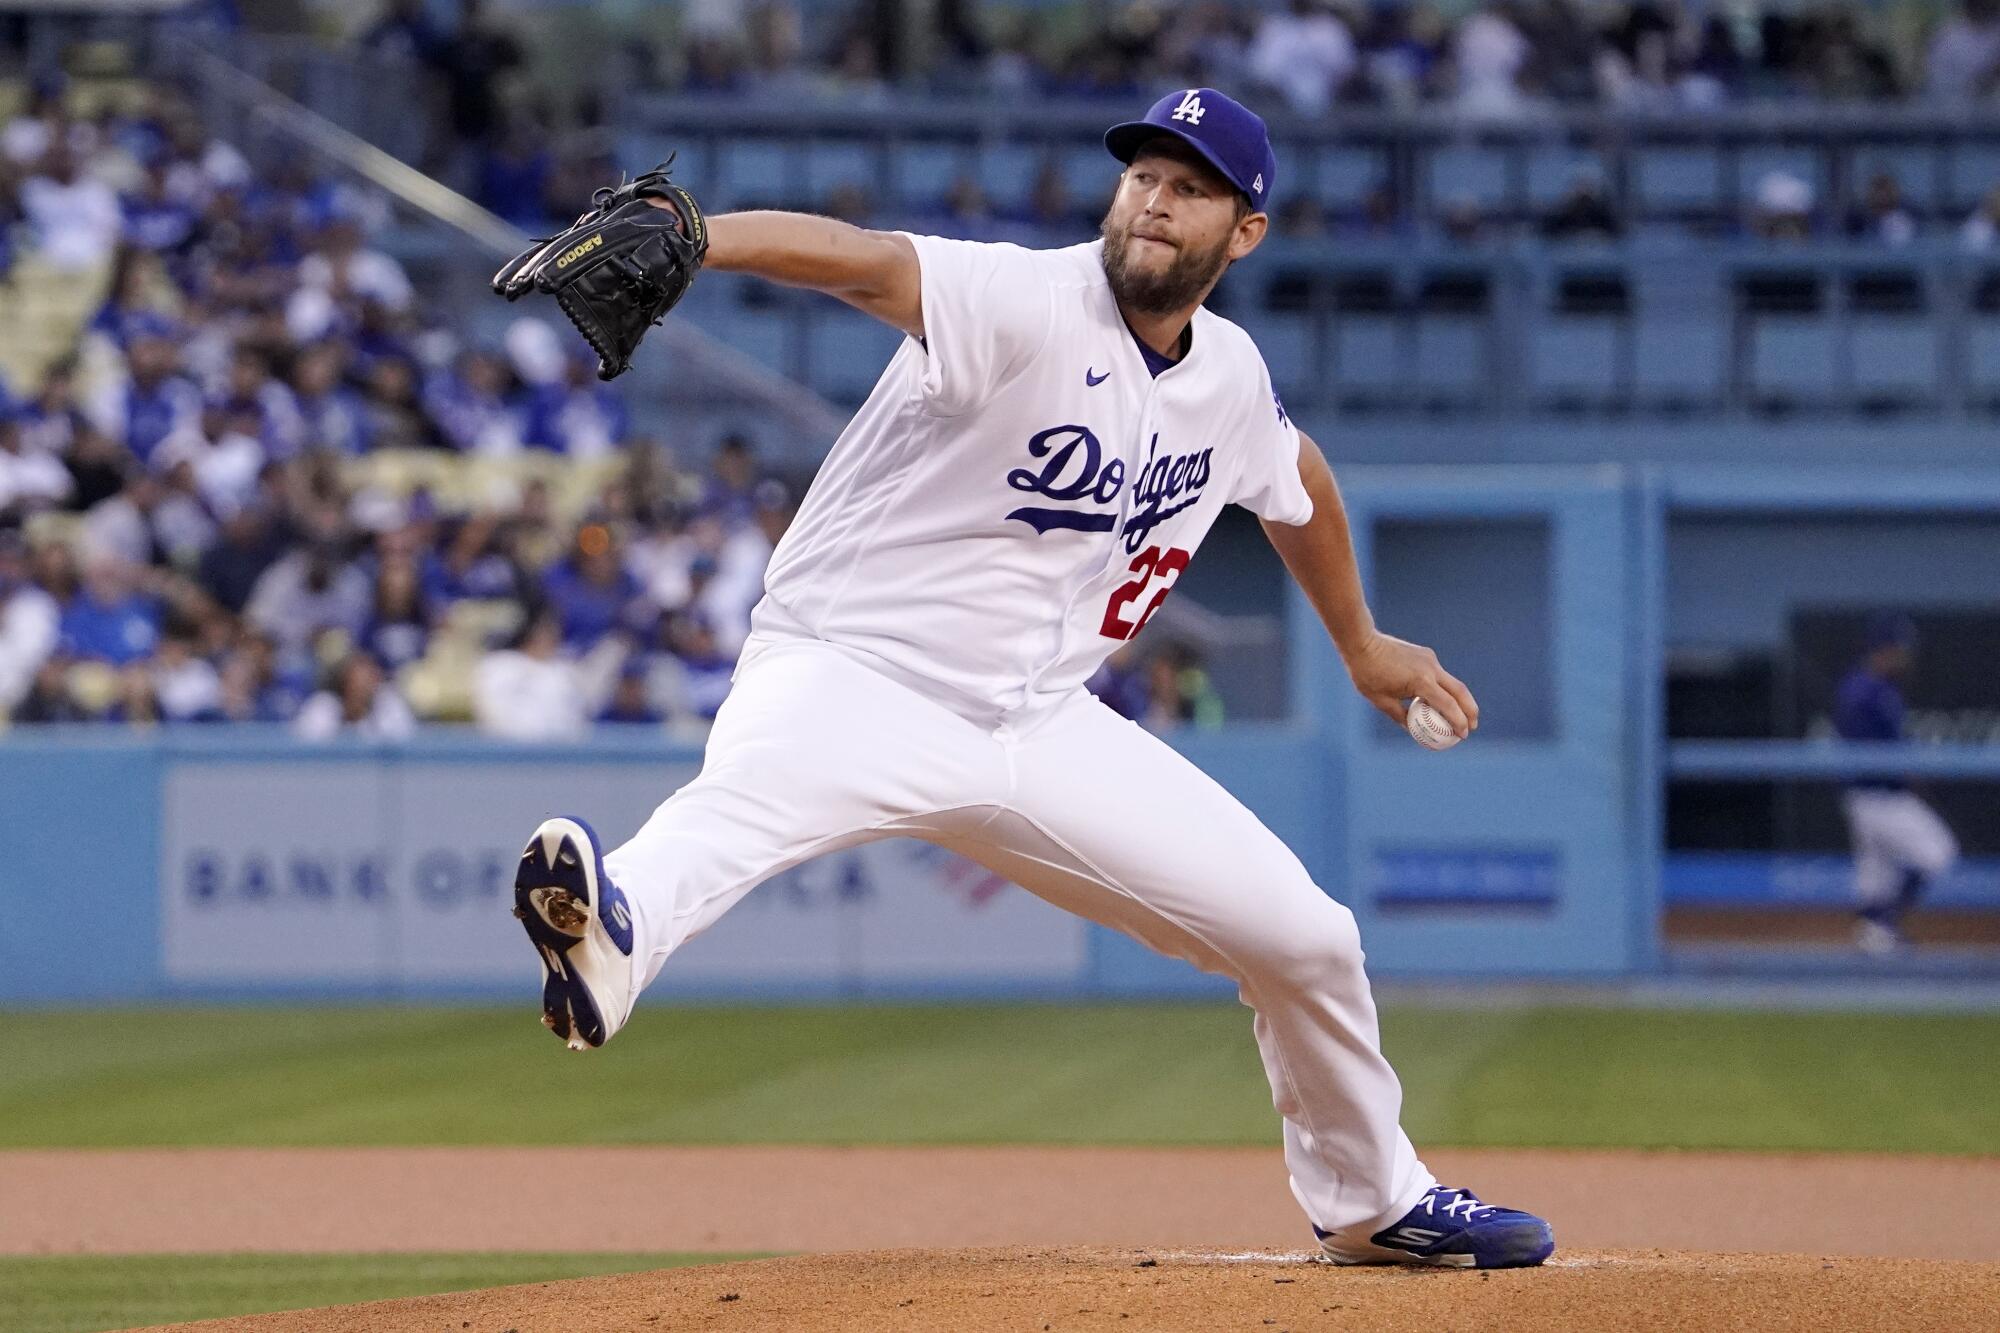 Los Angeles Dodgers starting pitcher Clayton Kershaw throws to the plate during the first inning.